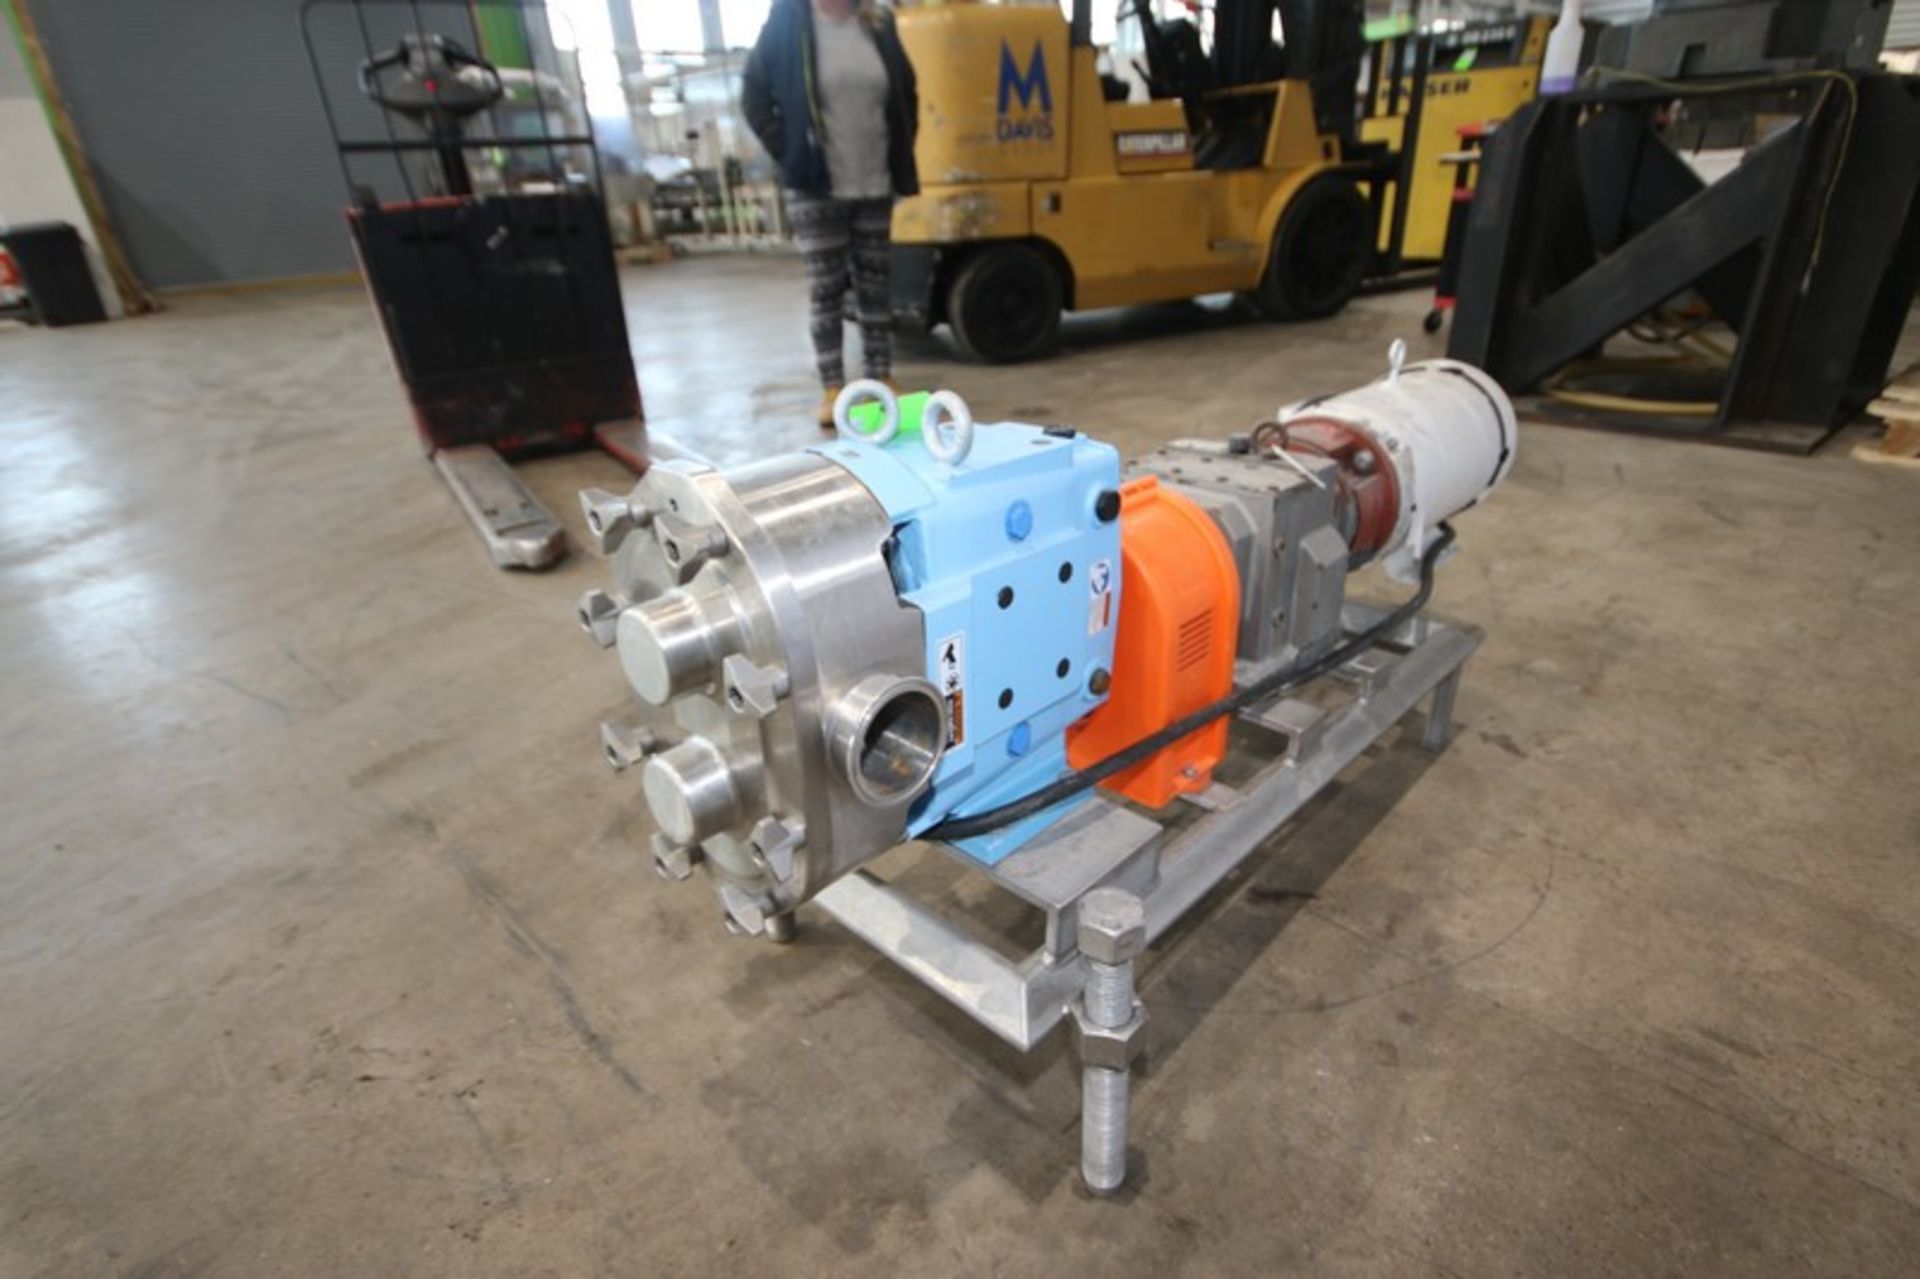 2020 SPX 10 hp Positive Displacement Pump, M/N 130 U1R2, S/N 1000003908697, with Aprox. 3" Clamp - Image 5 of 7